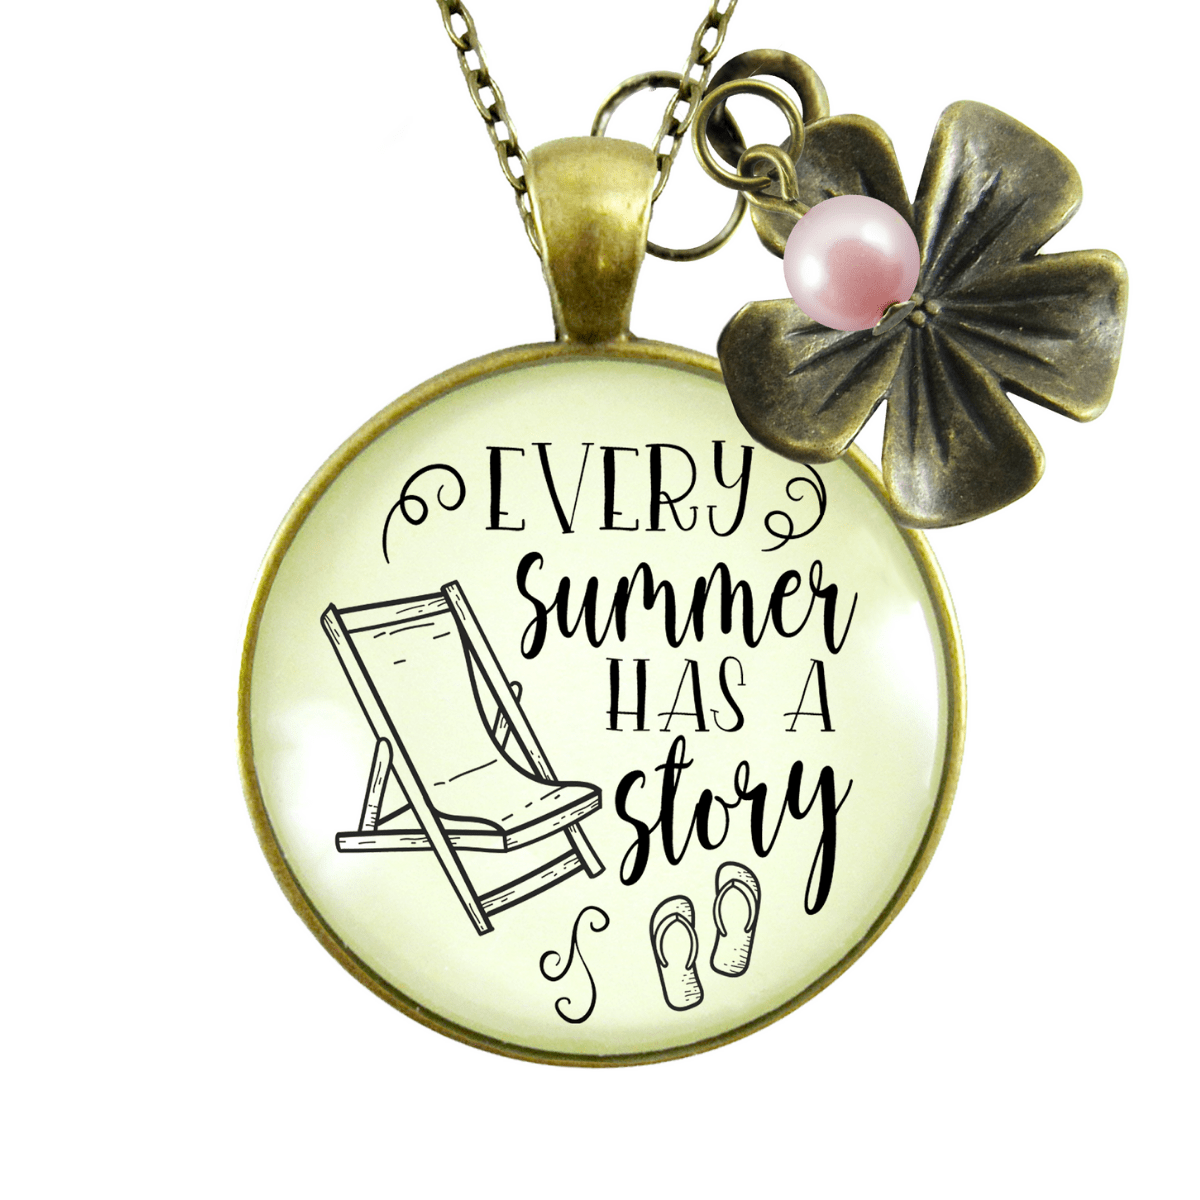 Gutsy Goodness Summertime Necklace Every Summer Has a Story Beach Fashion Jewelry - Gutsy Goodness Handmade Jewelry;Summertime Necklace Every Summer Has A Story Beach Fashion Jewelry - Gutsy Goodness Handmade Jewelry Gifts